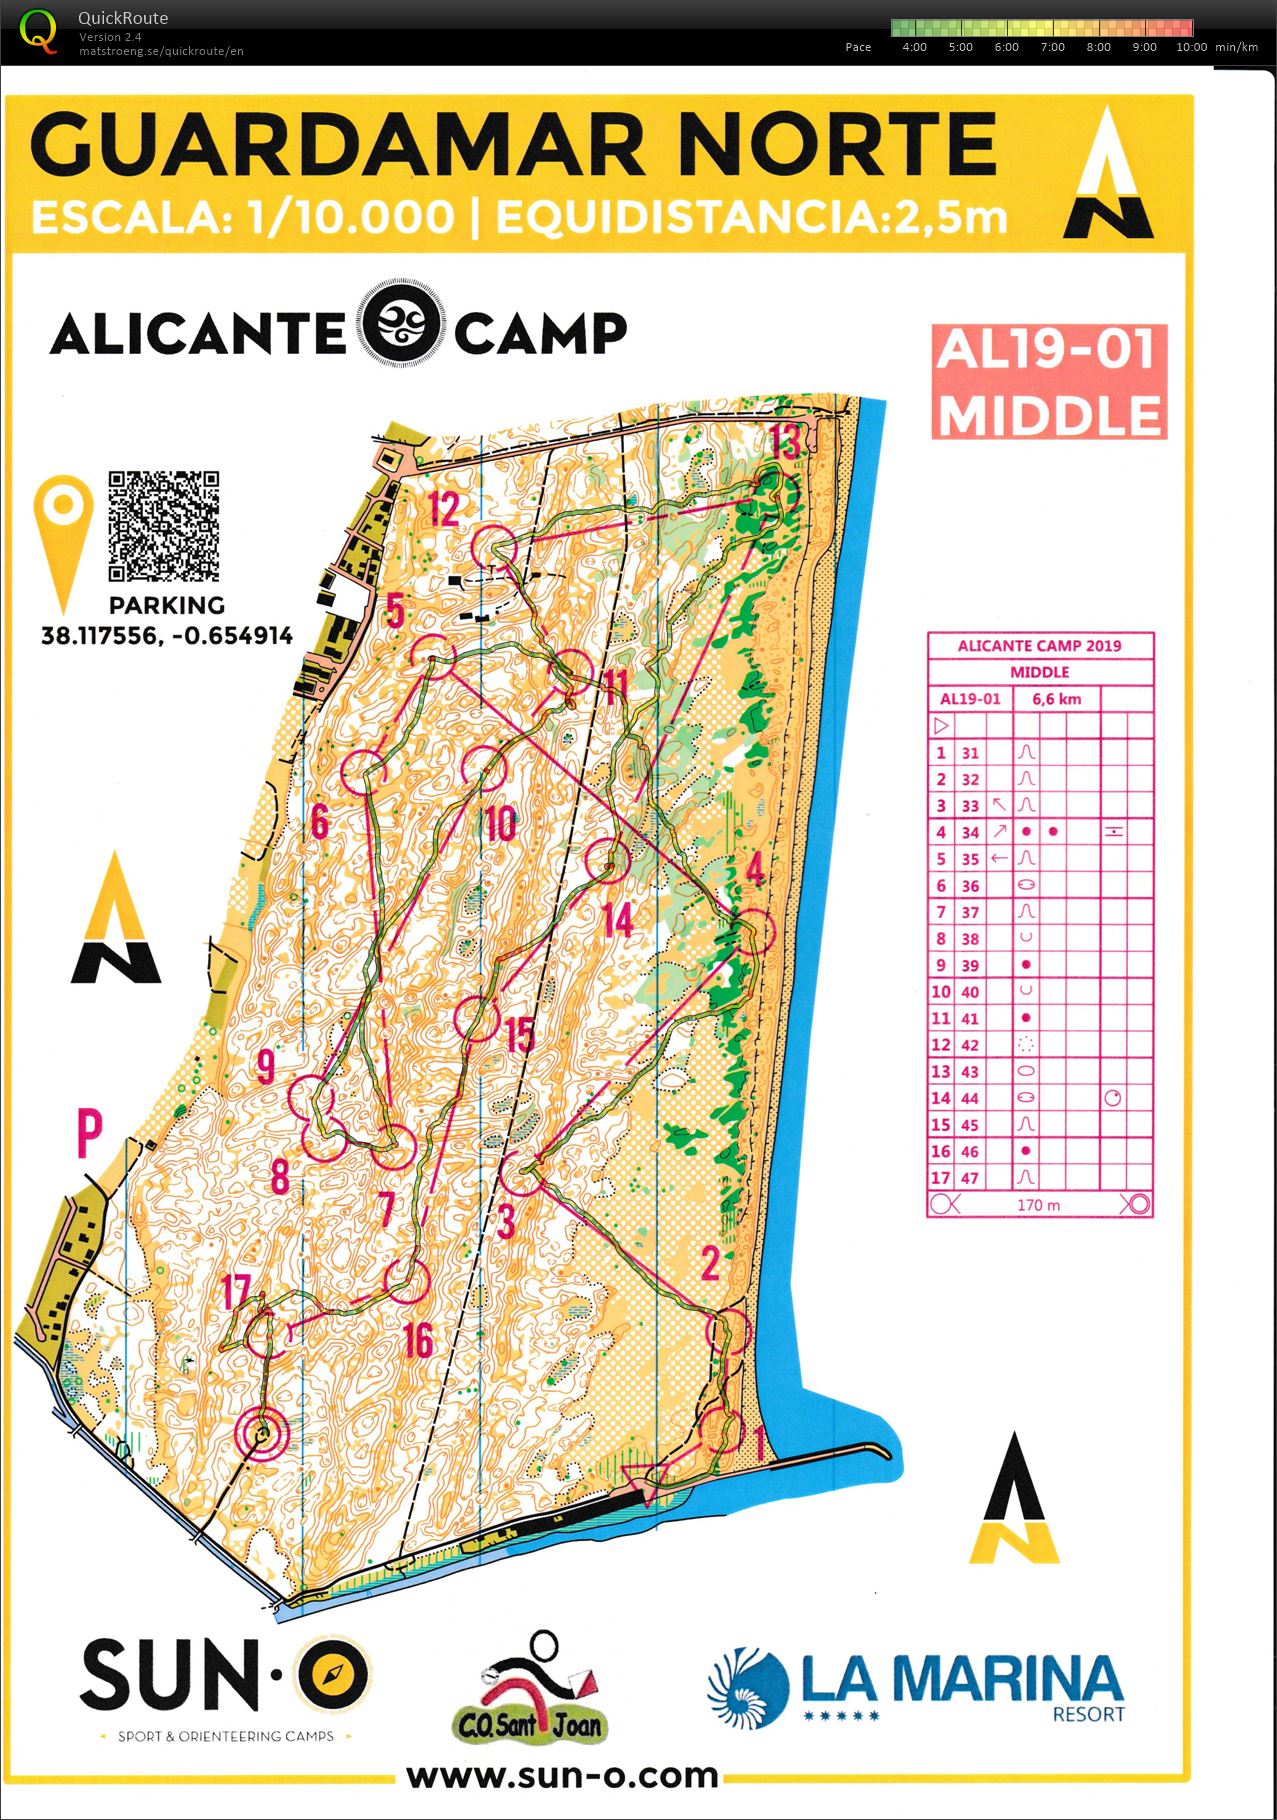 TC Alicante #7, middle rychle (23/01/2019)